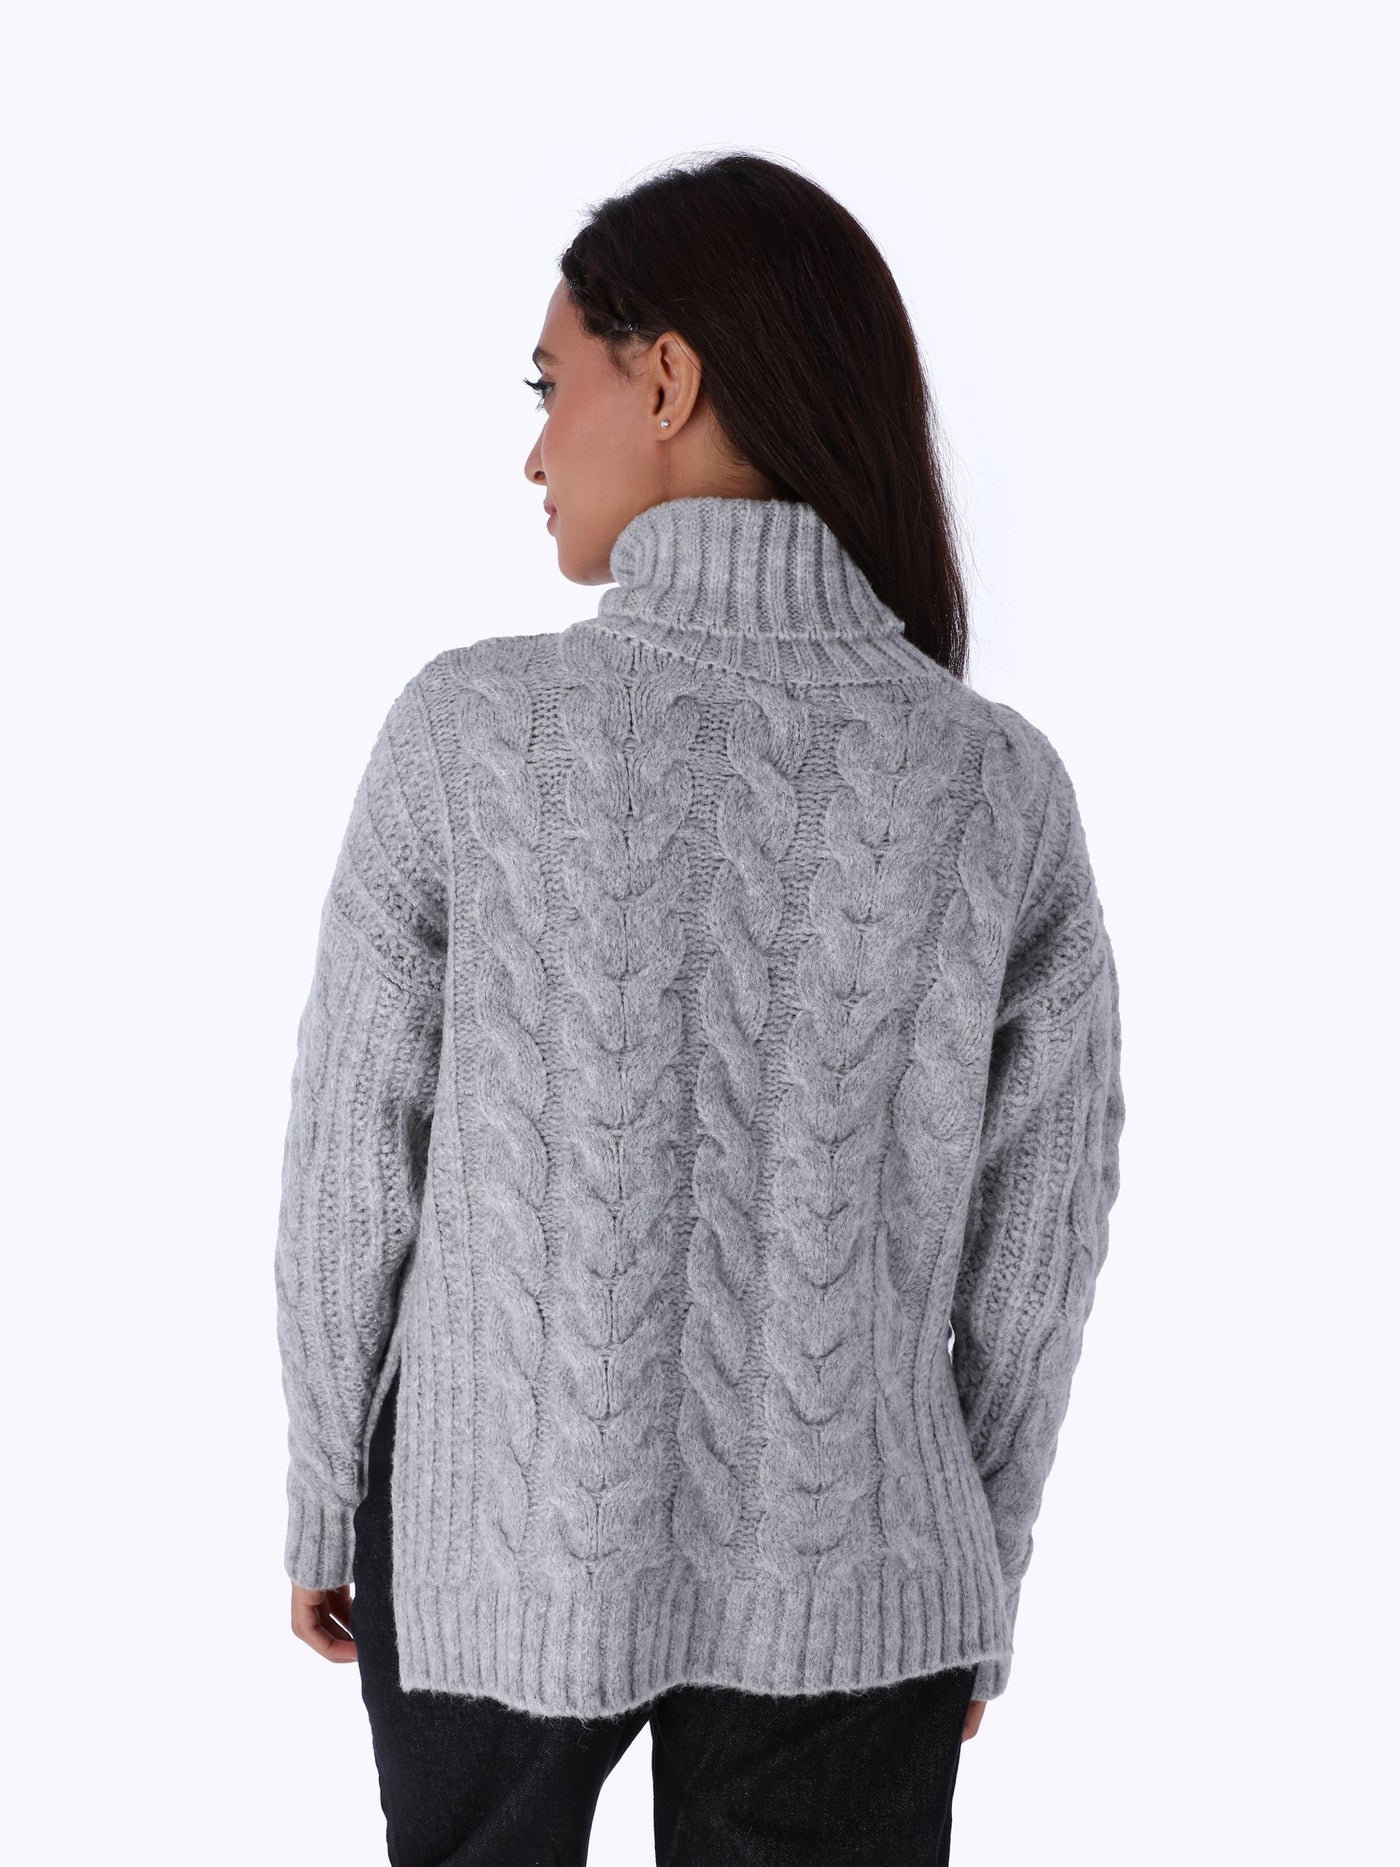 Knit Braided Pullover - Turtle Neck